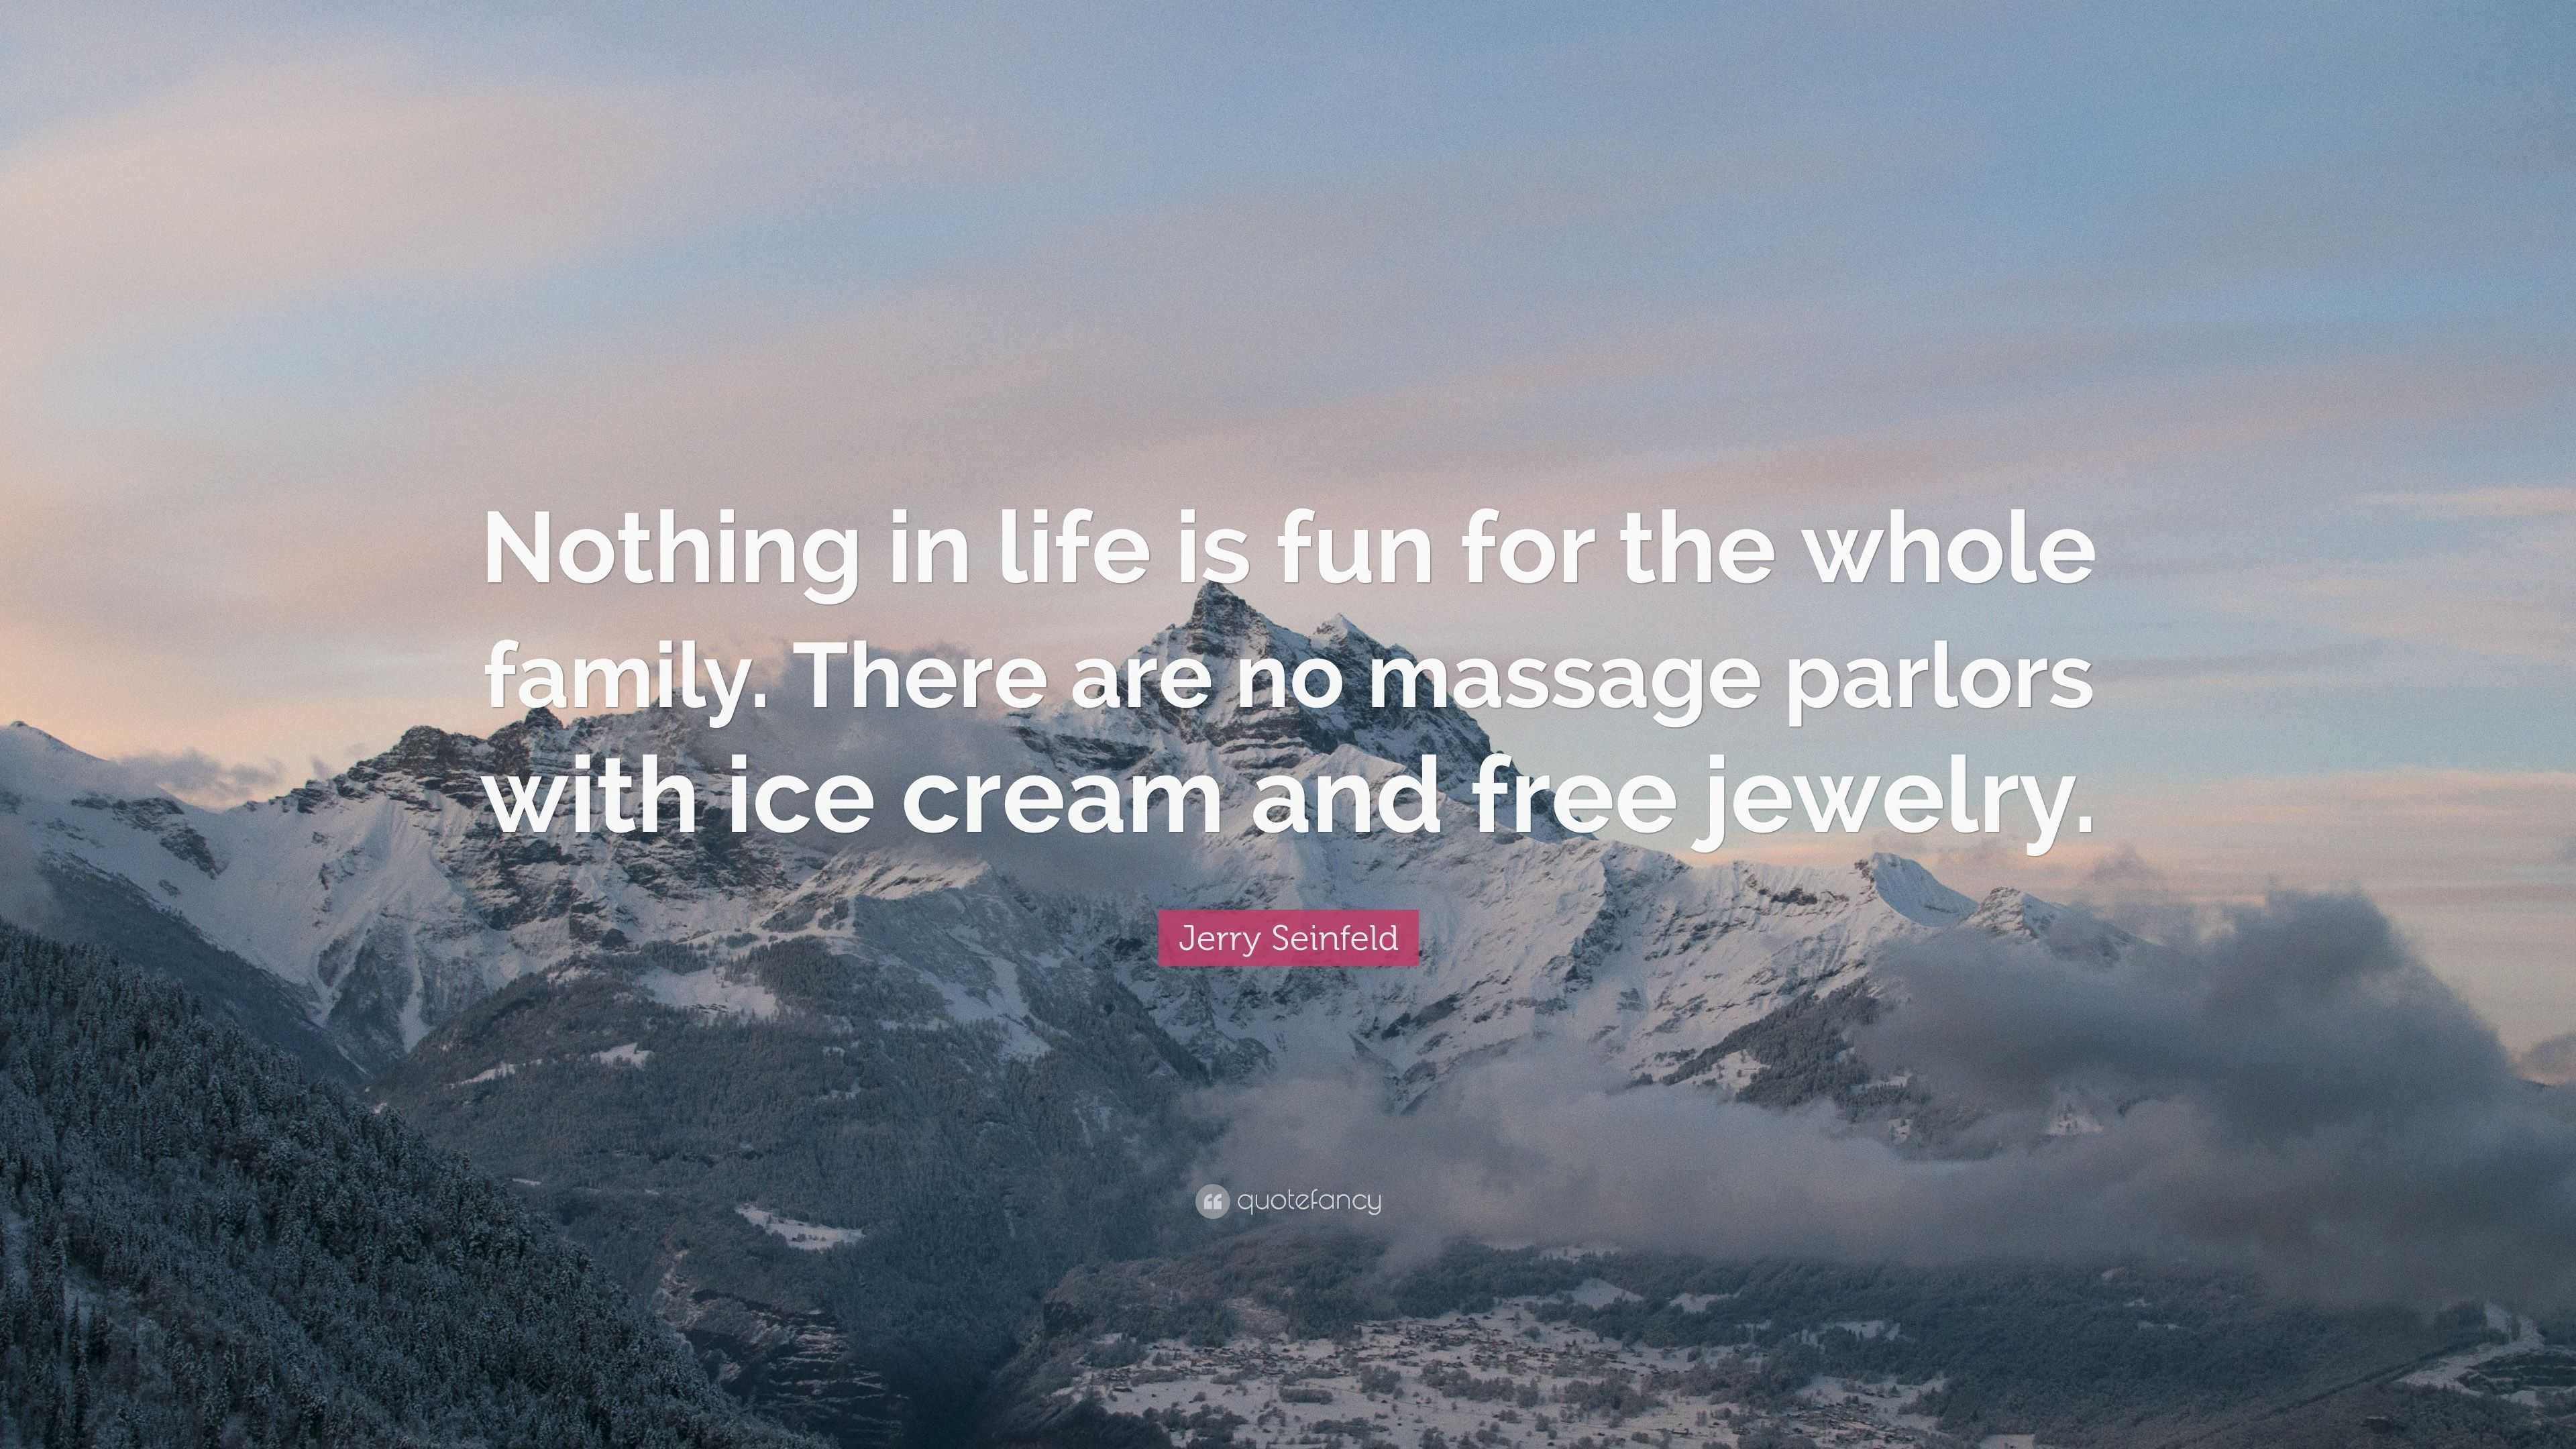 Jerry Seinfeld Quote: "Nothing in life is fun for the whole family. There are no massage parlors ...